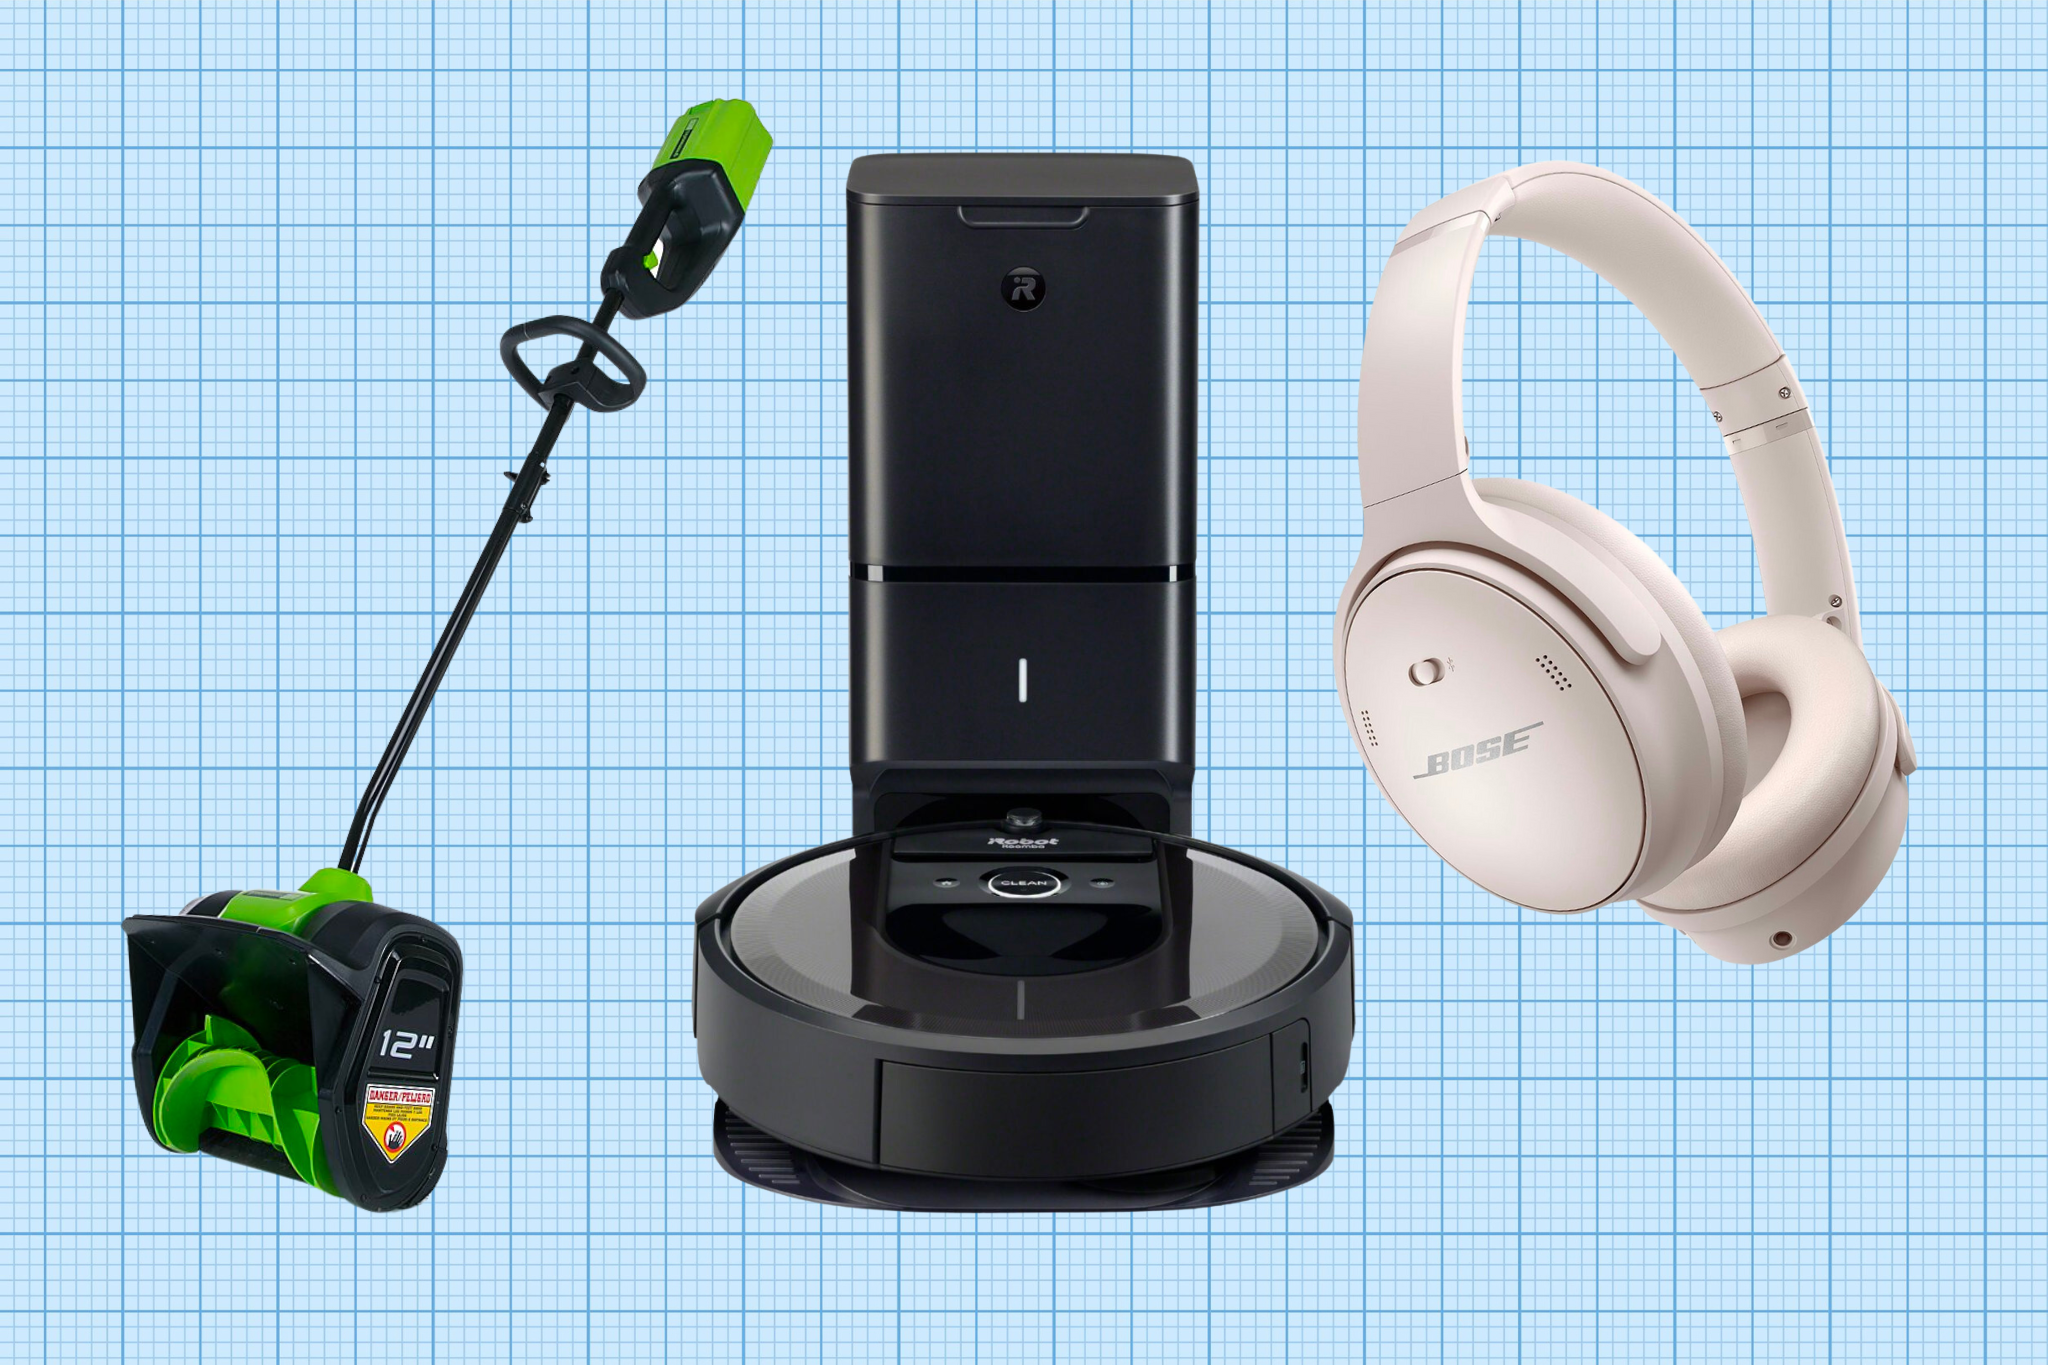 Greenworks 80V 12” Cordless Snow Shovel, iRobot Roomba i7+ Robot Vacuum, and Bose QuietComfort Wireless Noise-Canceling Headphones isolated on a blue grid paper background